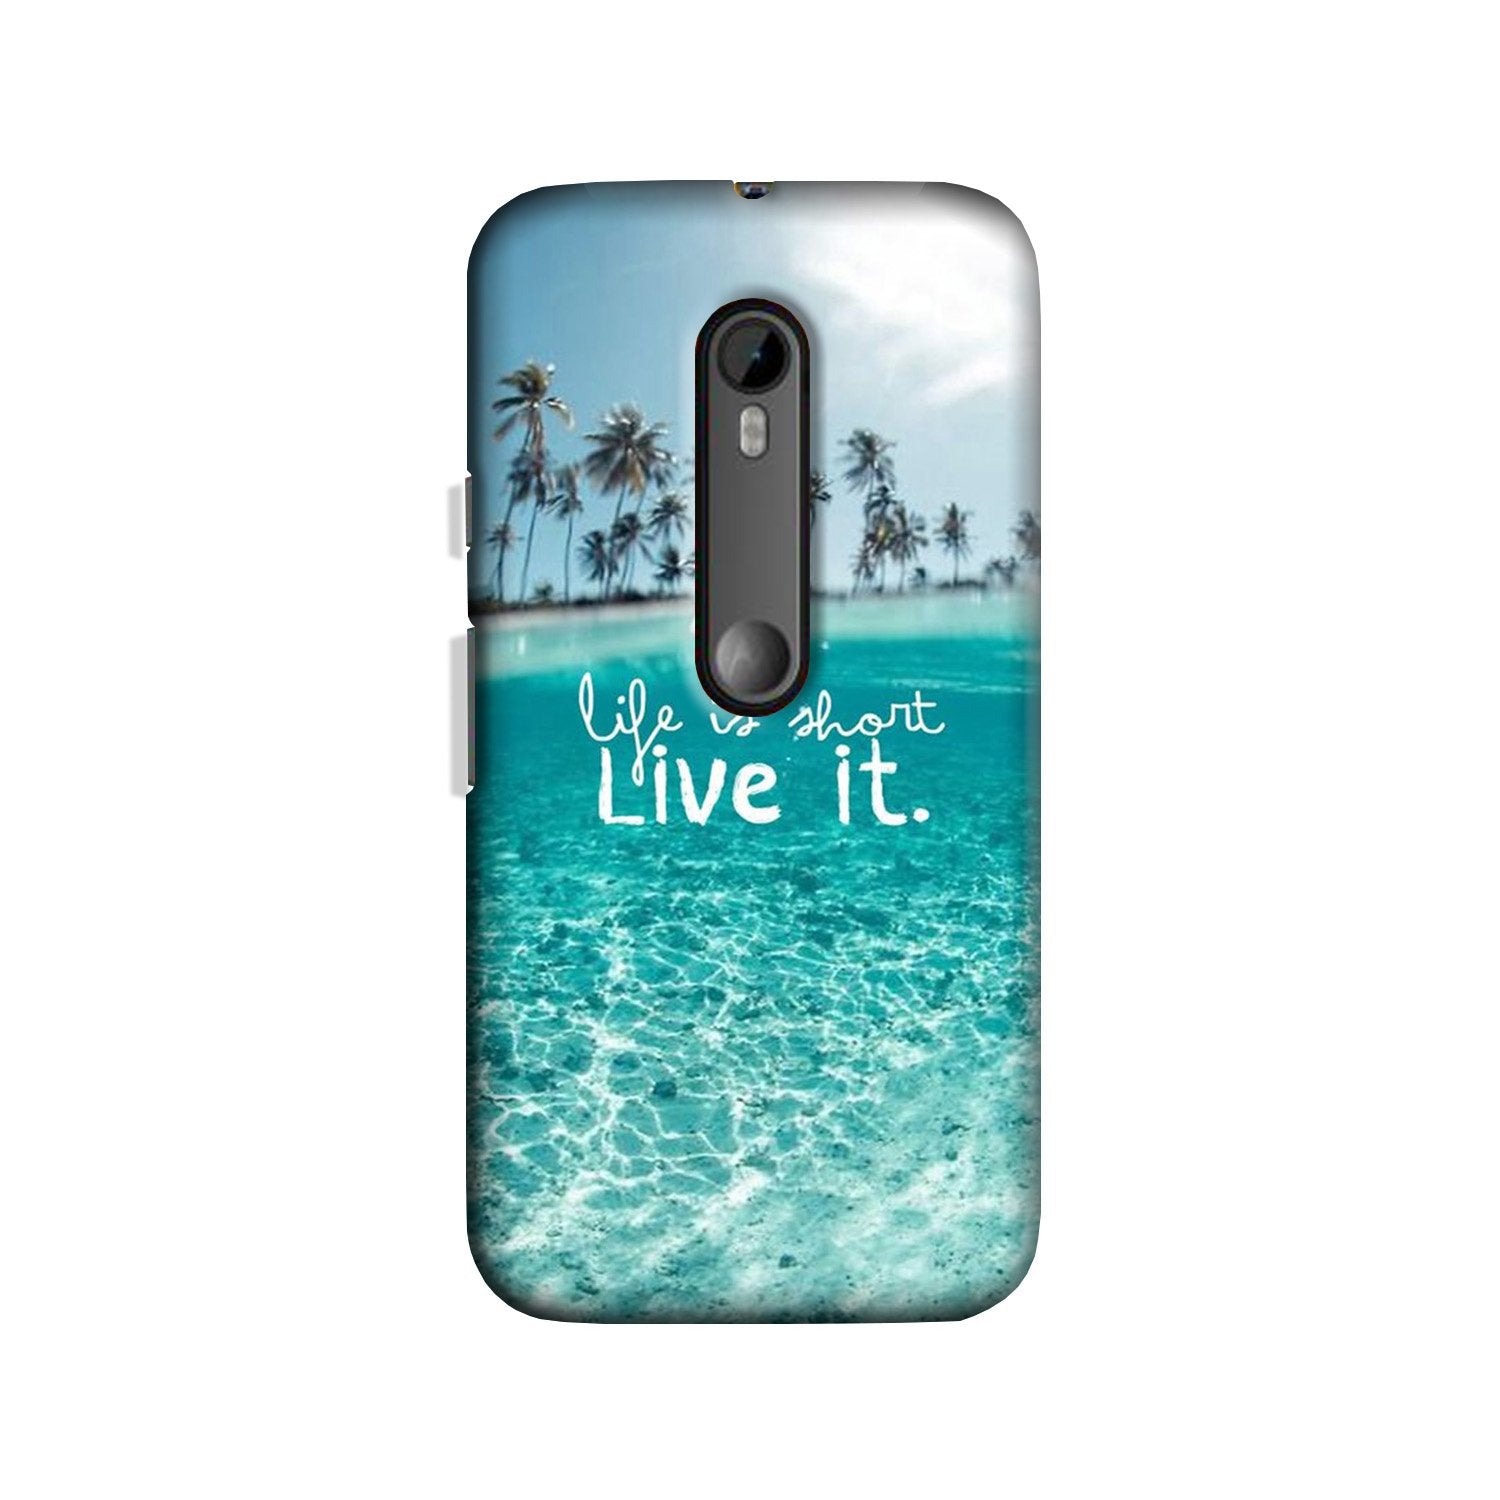 Life is short live it Case for Moto X Play